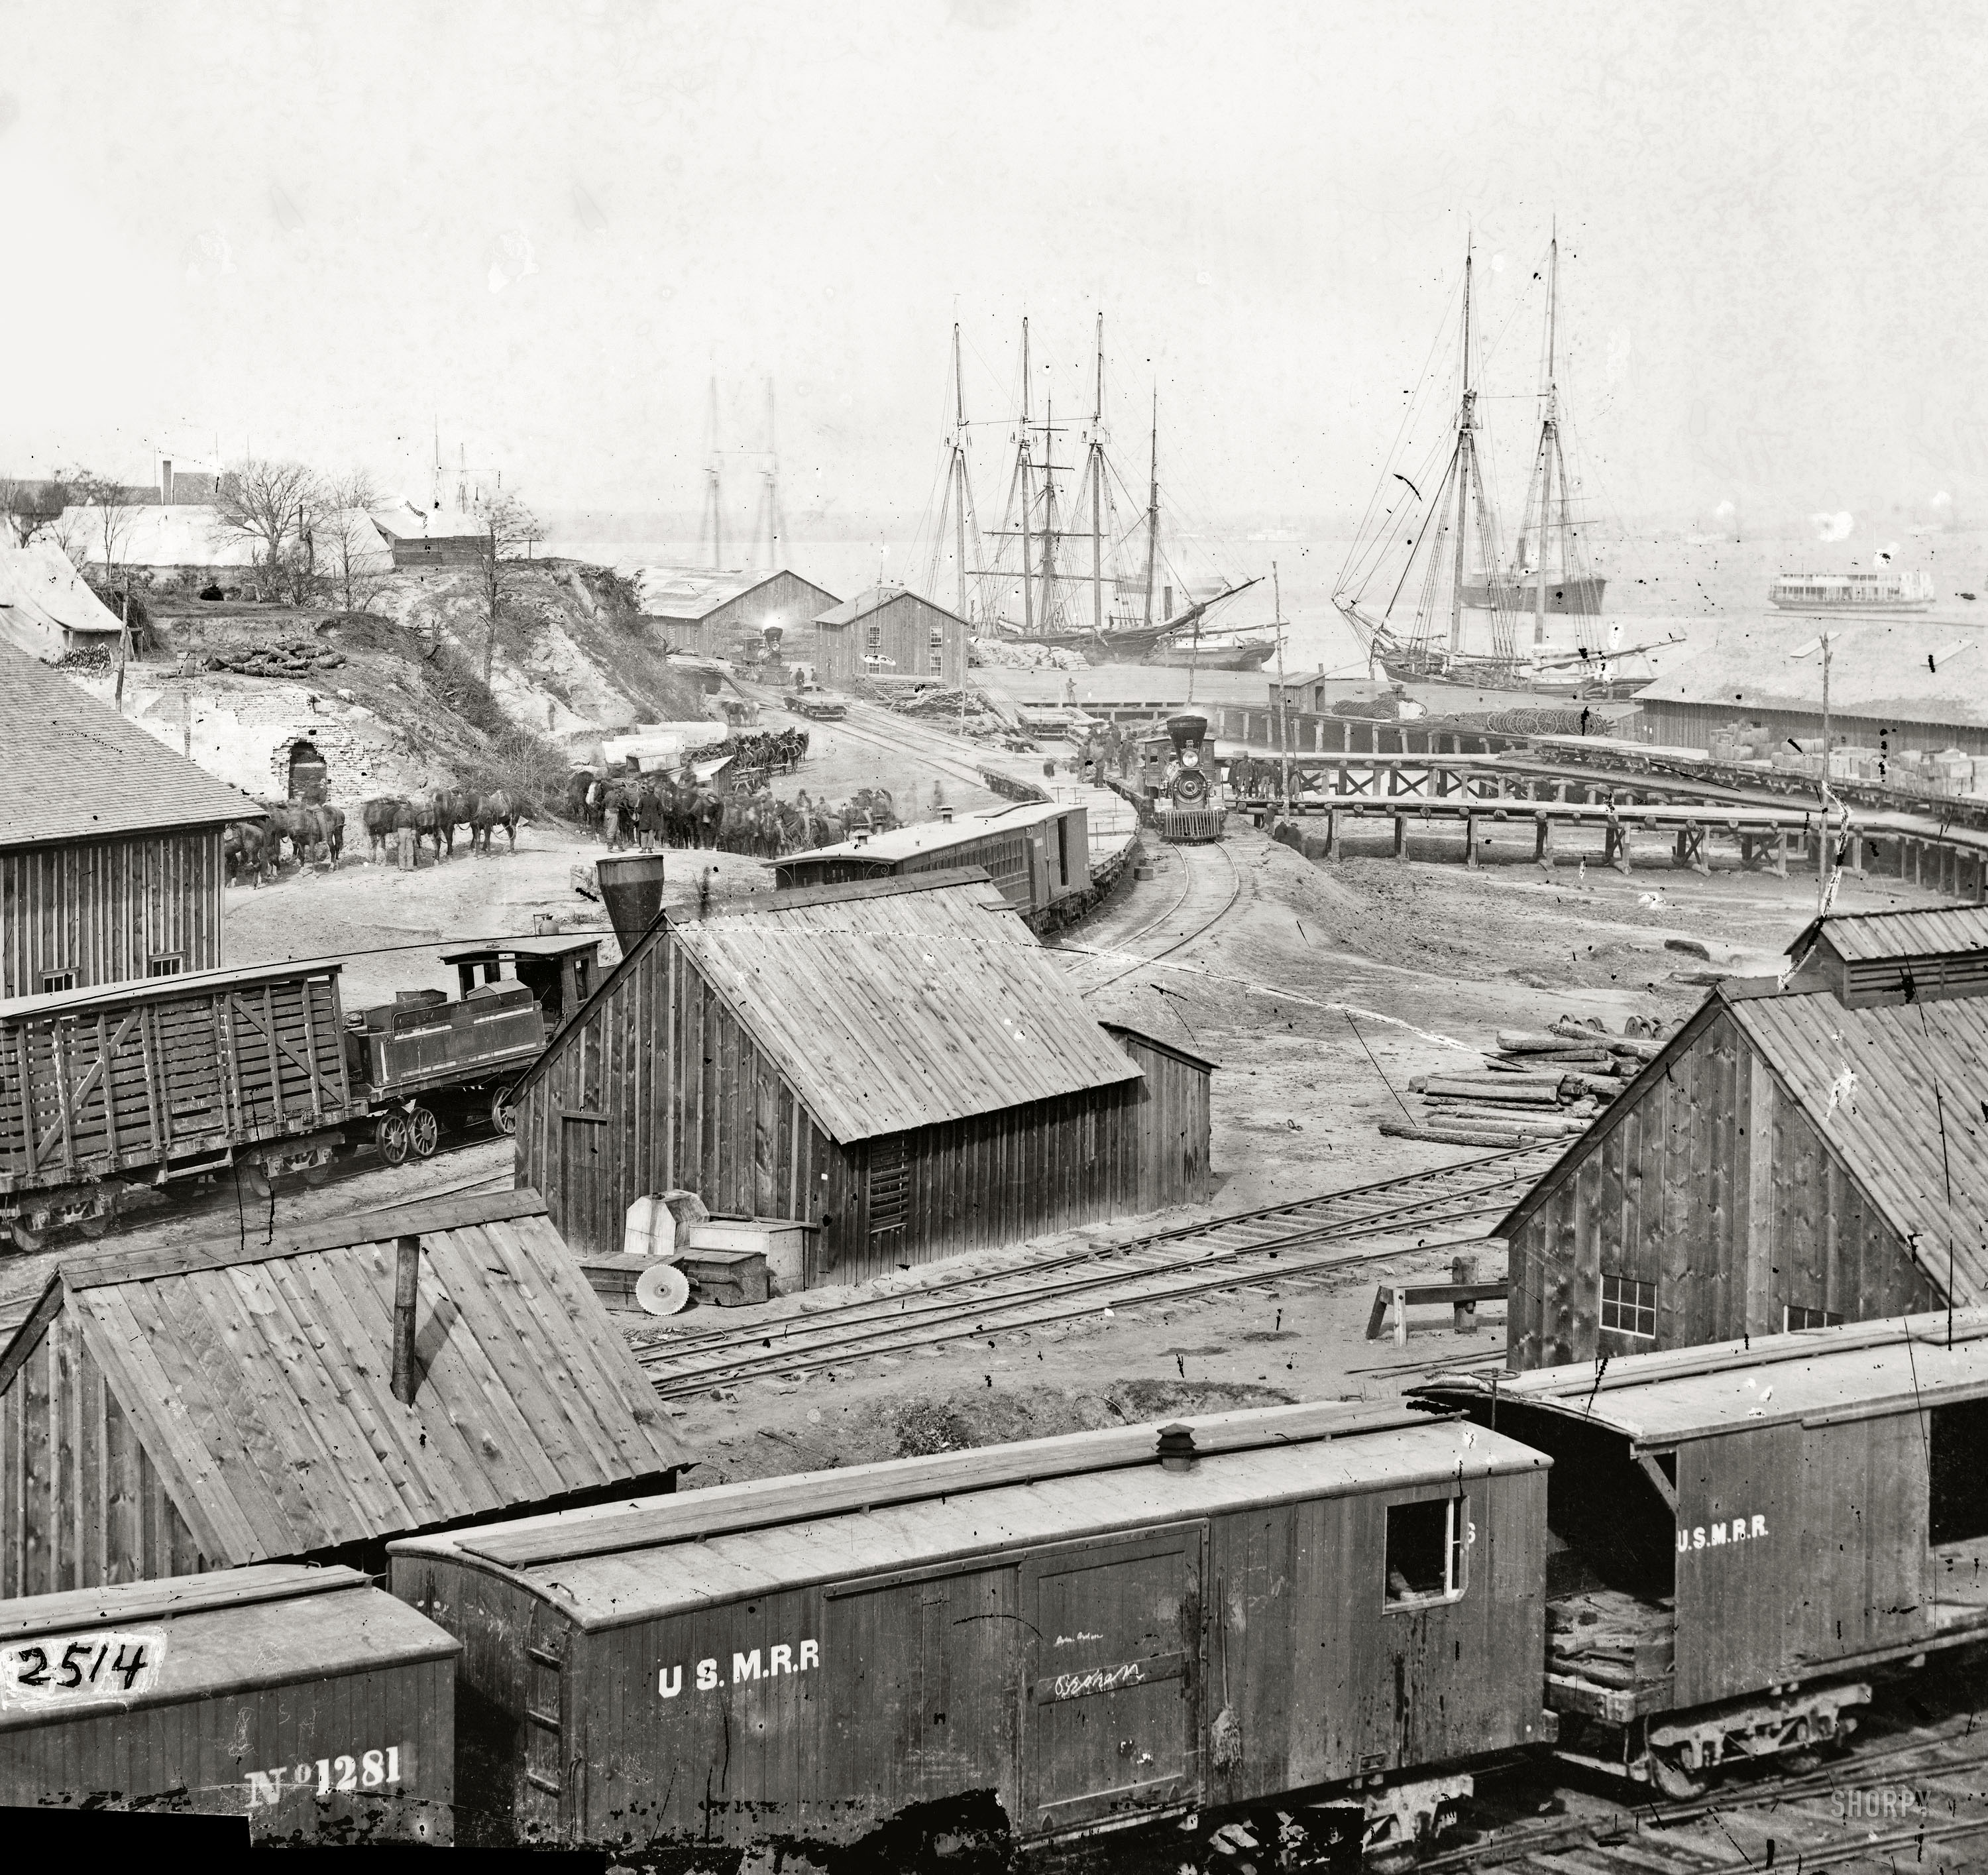 Circa 1865. "City Point, Virginia. Railroad yard and transports." Wet plate glass negative, half of stereograph pair. Studio of Mathew Brady. View full size.